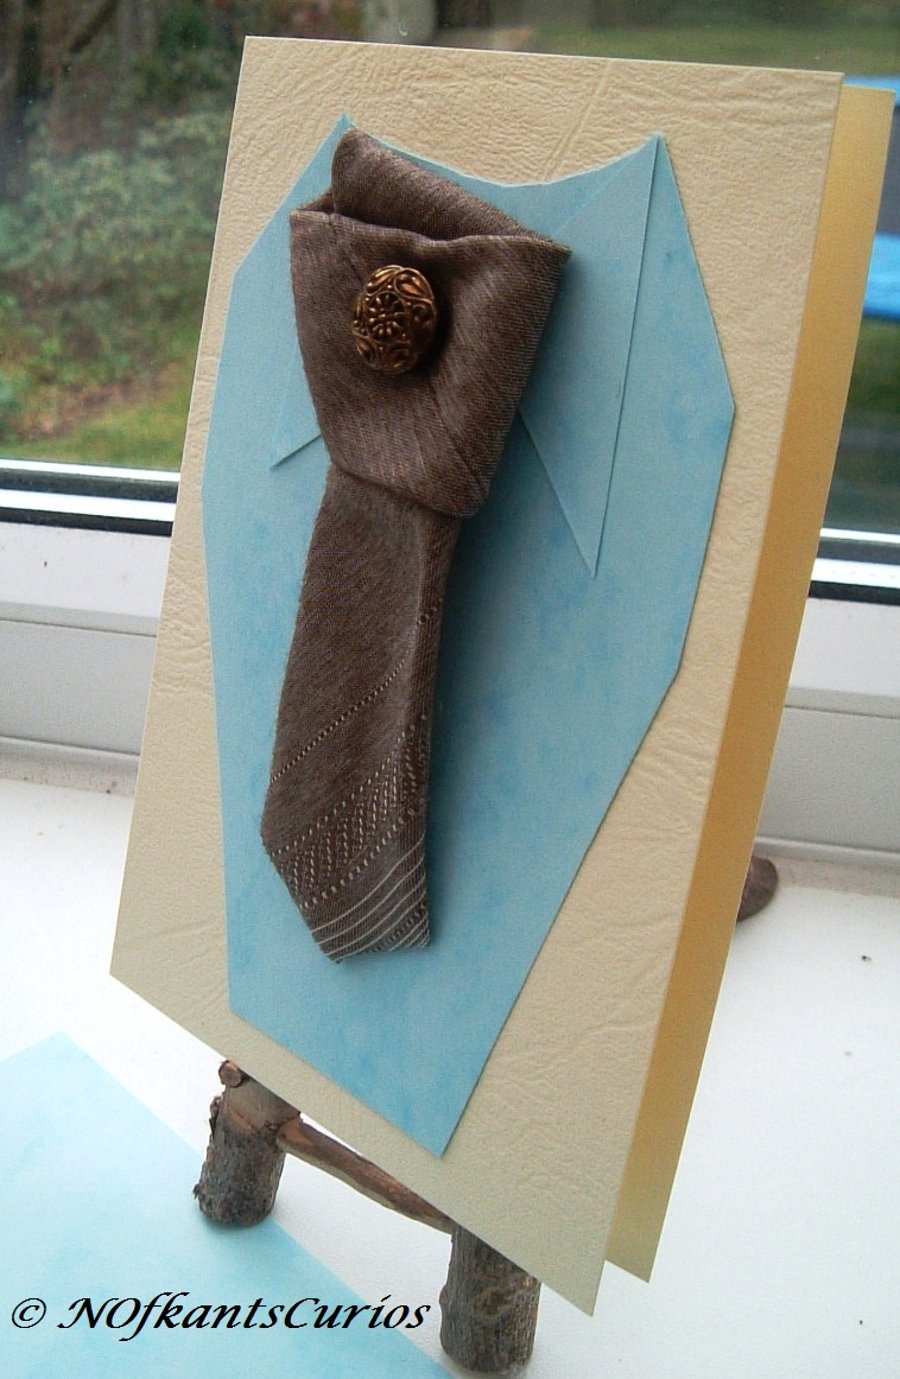 Tied to My Greeting Card!  Blank 3D Card with Actual Gent's Neck Tie.